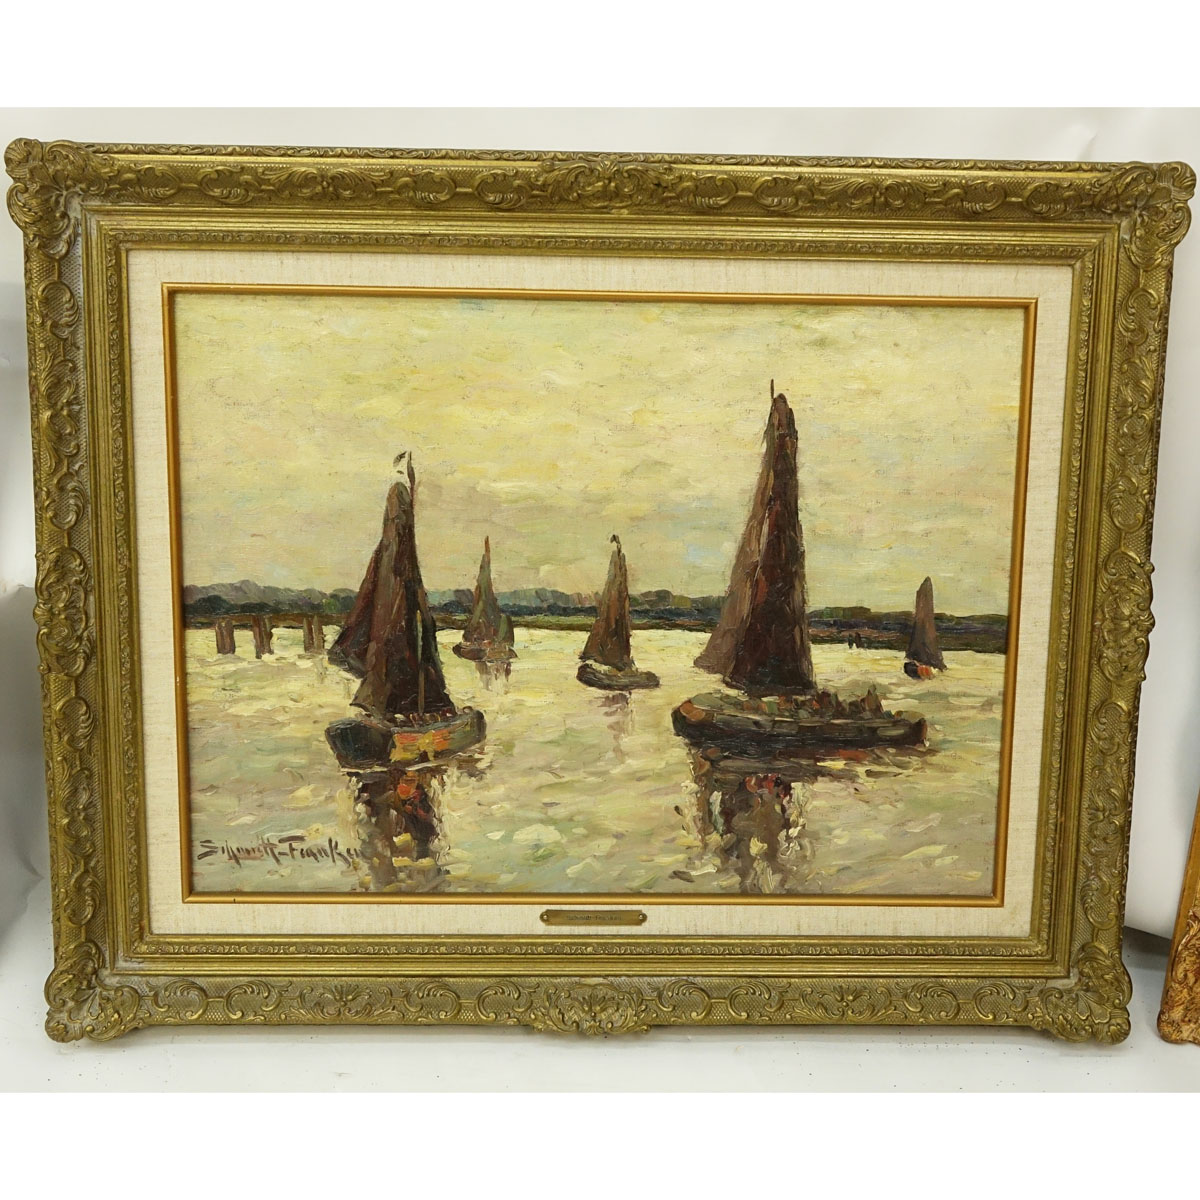 Maria Schmidt-Franken, German (1889-1967) Oil on Canvas, Sailboats in Open Water, Signed Lower Left. Tag with artist name attached to frame, Inscribed en verso.